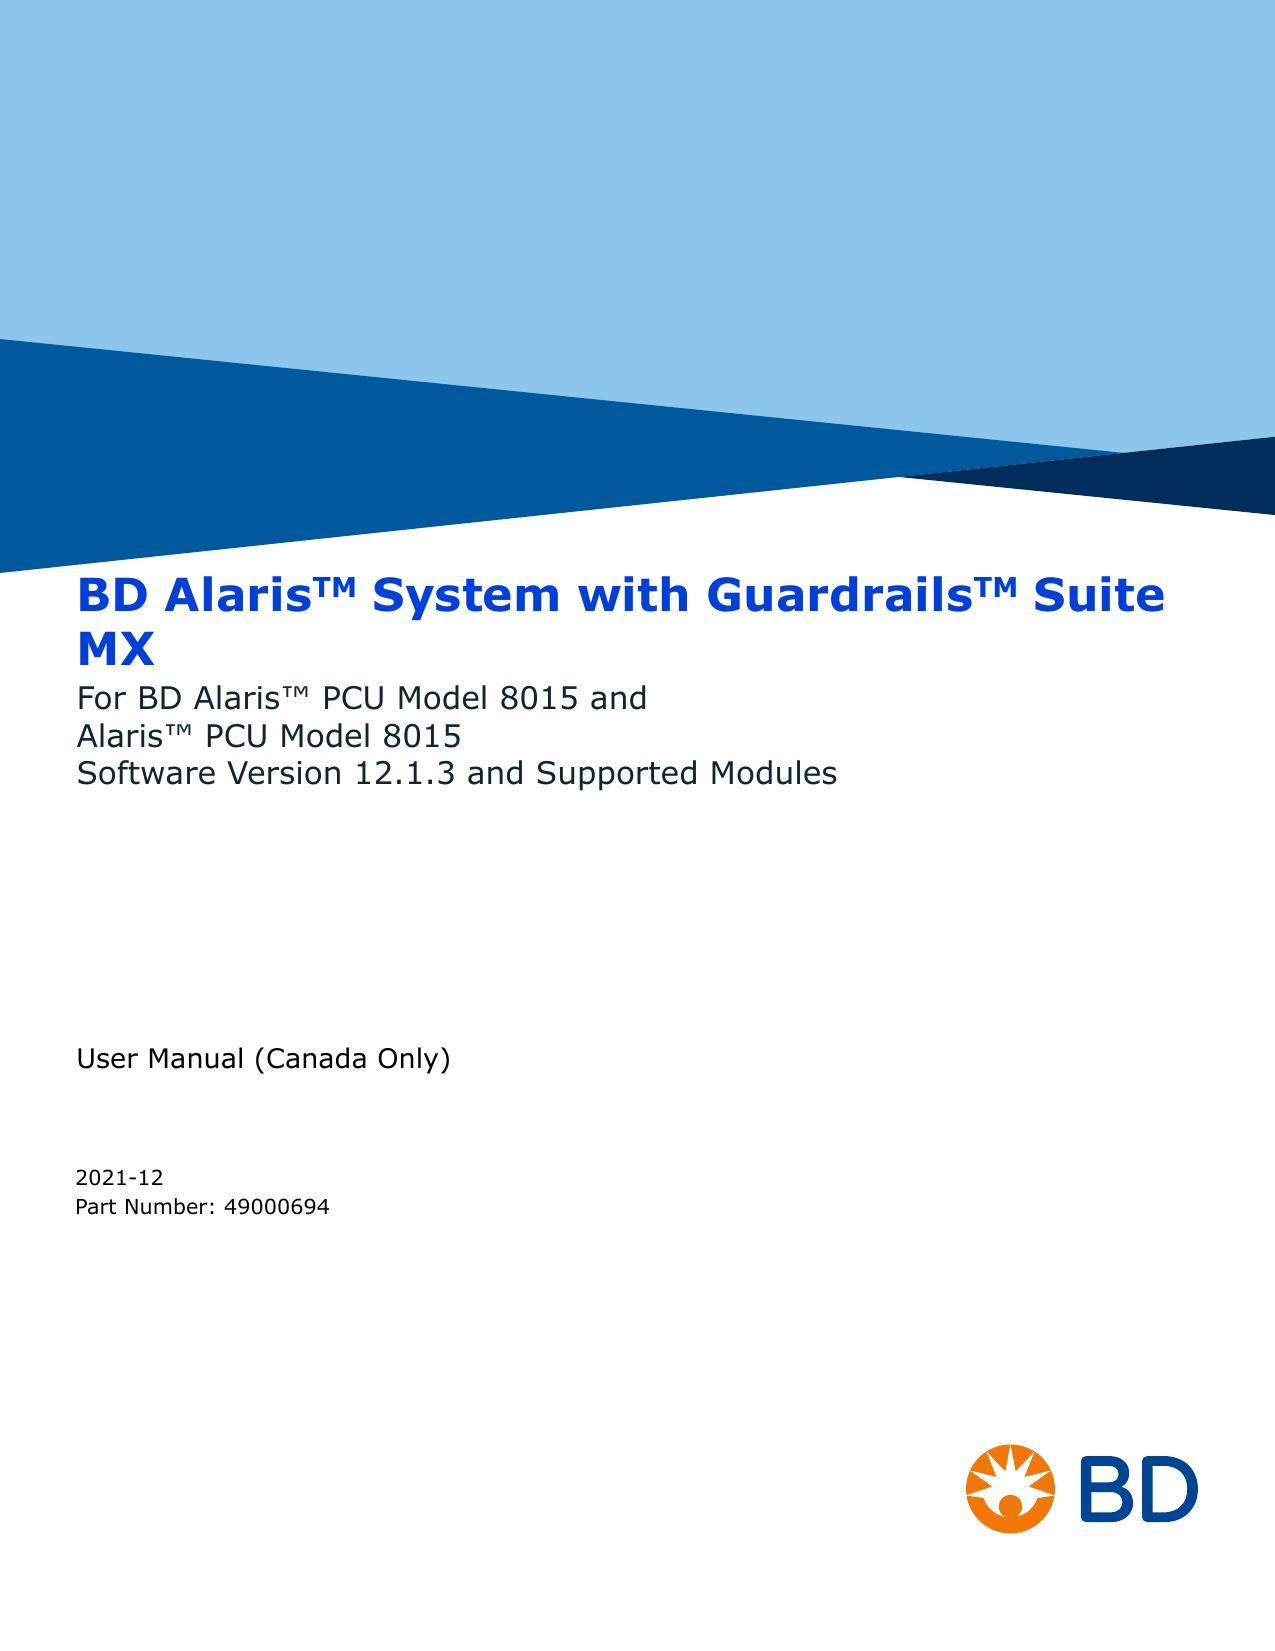 bd-alaris-system-with-guardrails-suite-mx-user-manual-for-bd-alaris-pcu-model-8015-and-alaris-pcu-model-8015-software-version-1213-and-supported-modules.pdf